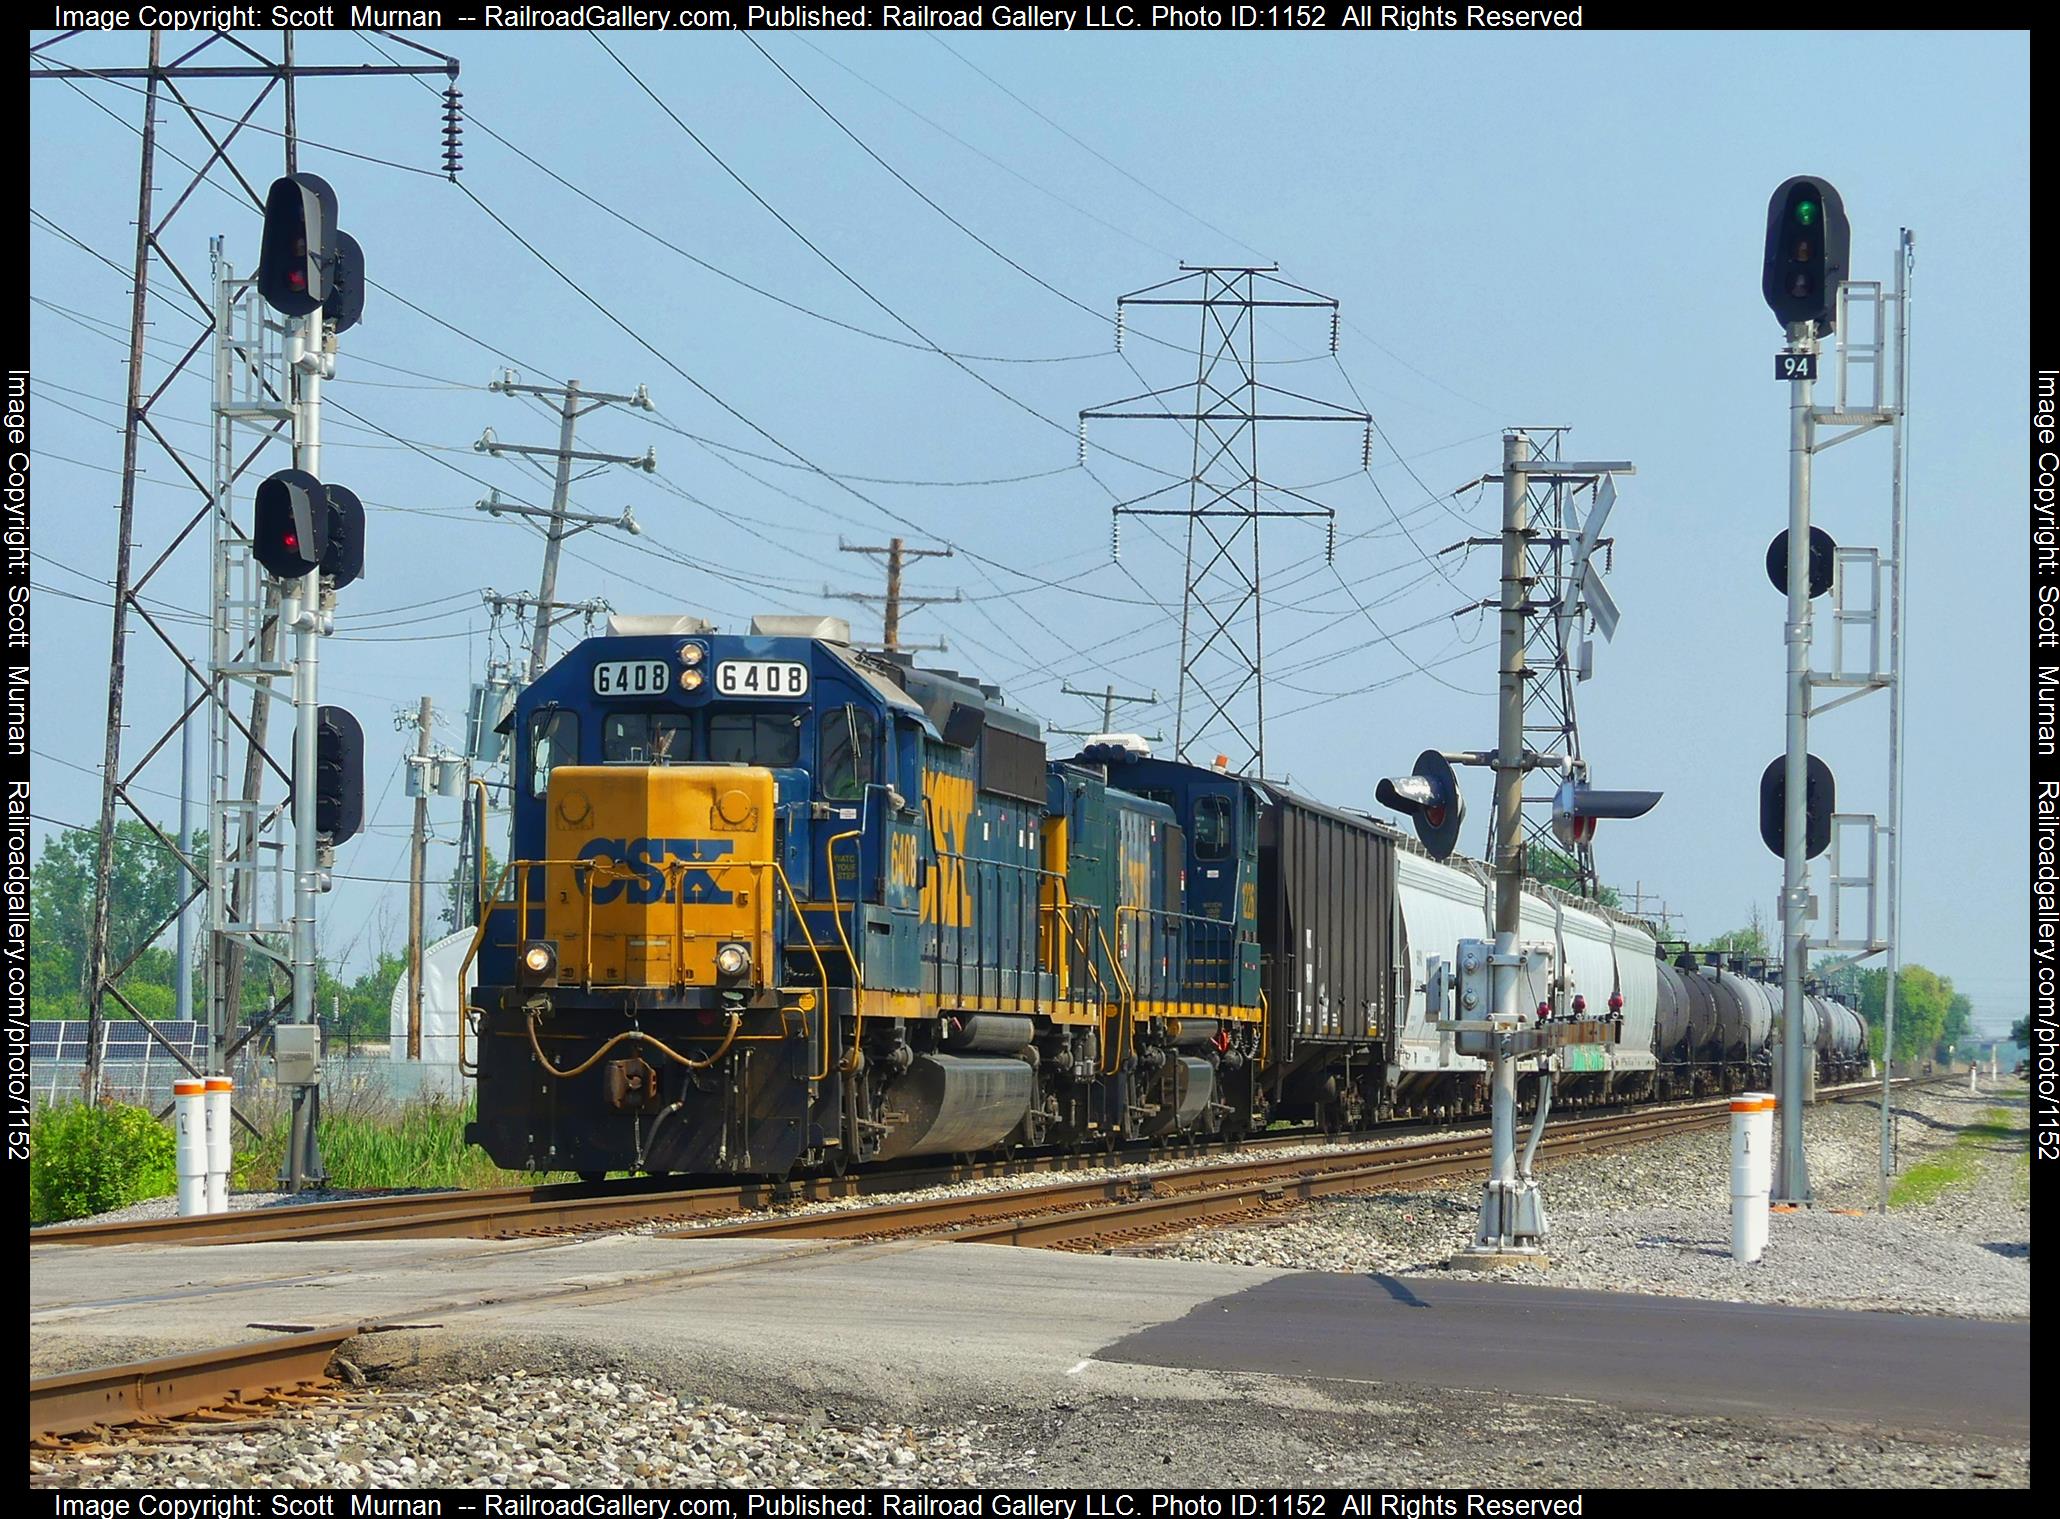 CSX 6408 is a class EMD GP40-2 and  is pictured in Kenmore , New York, United States.  This was taken along the Niagara Branch  on the CSX Transportation. Photo Copyright: Scott  Murnan  uploaded to Railroad Gallery on 06/20/2023. This photograph of CSX 6408 was taken on Monday, June 19, 2023. All Rights Reserved. 